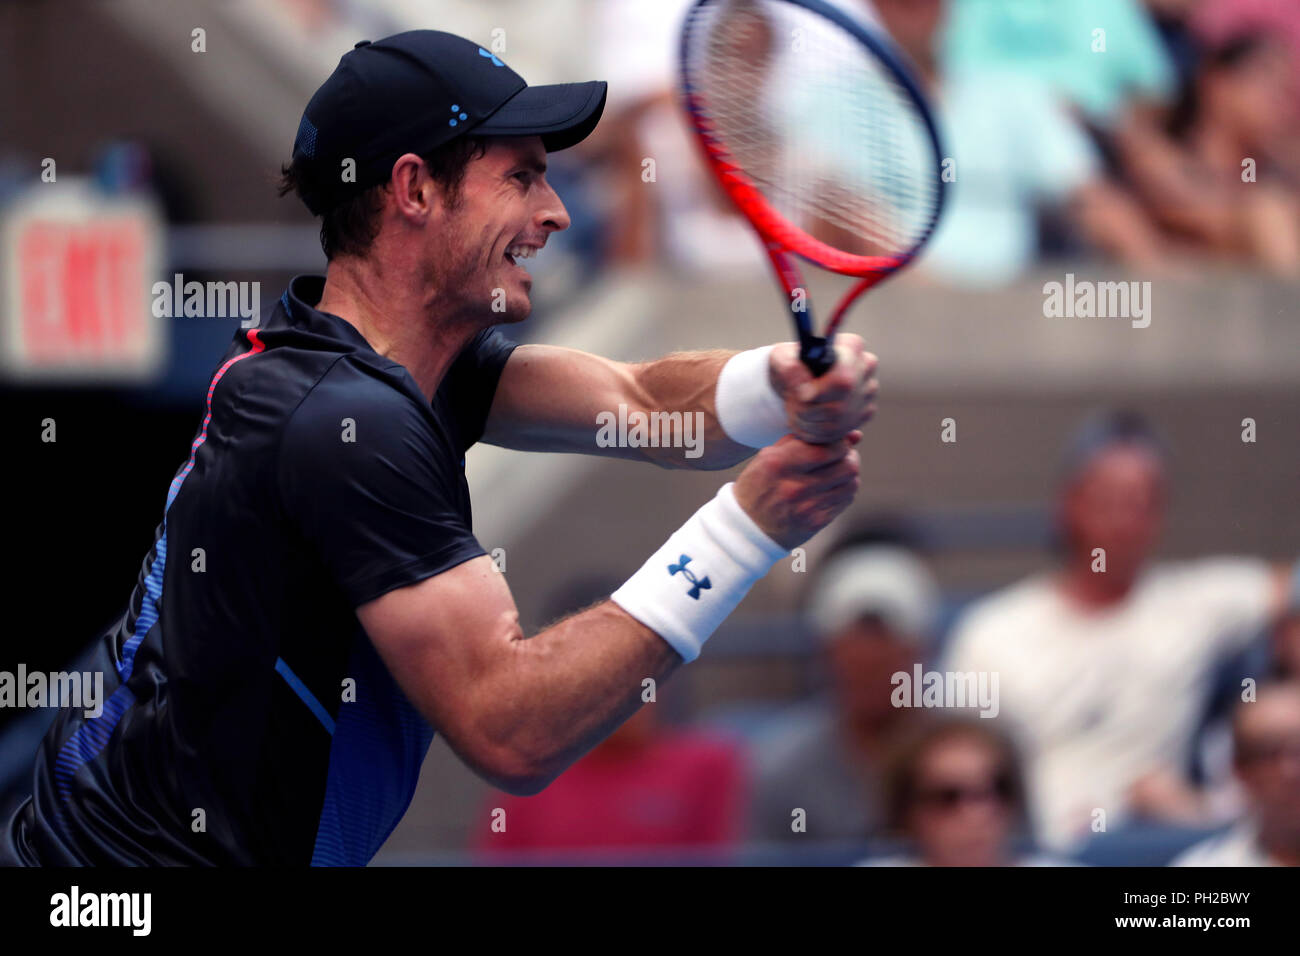 New York, United States. 29th Aug, 2018. Flushing Meadows, New York - August 29, 2018: US Open Tennis: Andy Murray of Great Britain during his second round match to Fernando Verdasco of Spain at the US Open in Flushing Meadows, New York. Verdasco won the match in four sets. Credit: Adam Stoltman/Alamy Live News Stock Photo